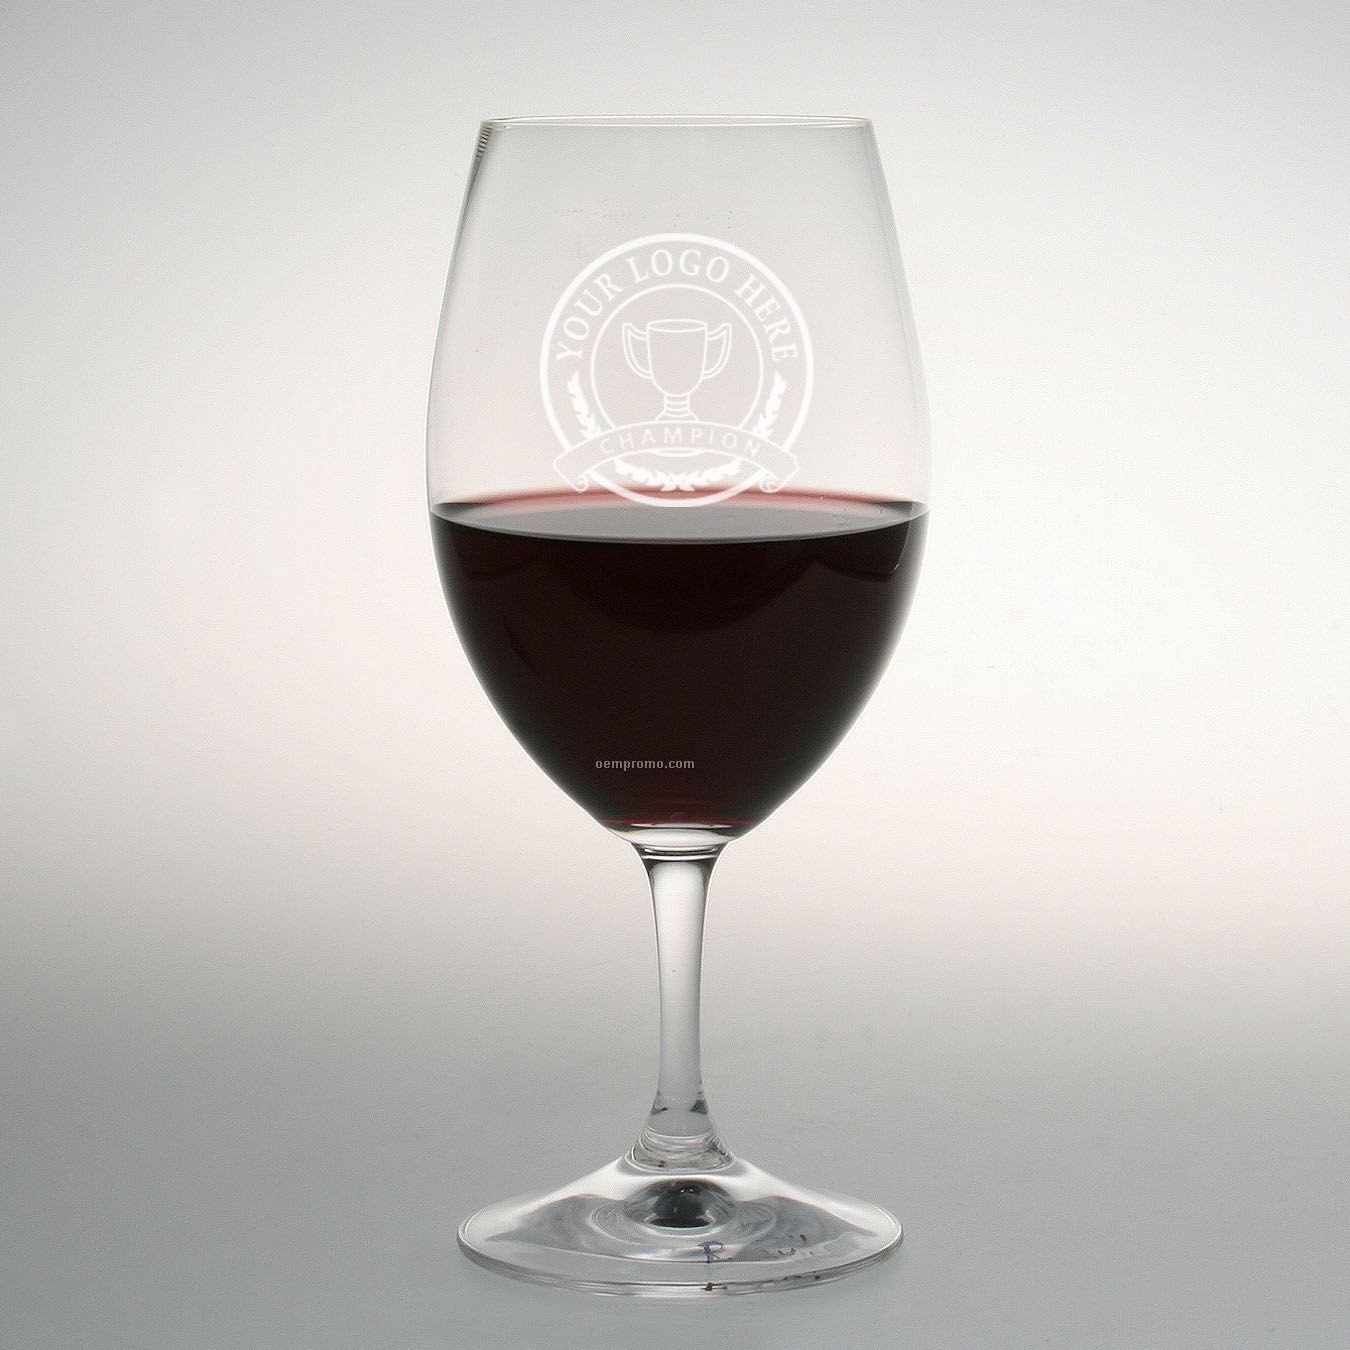 Personalised Glasses - Riedel Ouverture Crystal Wine Glasses With Engraving